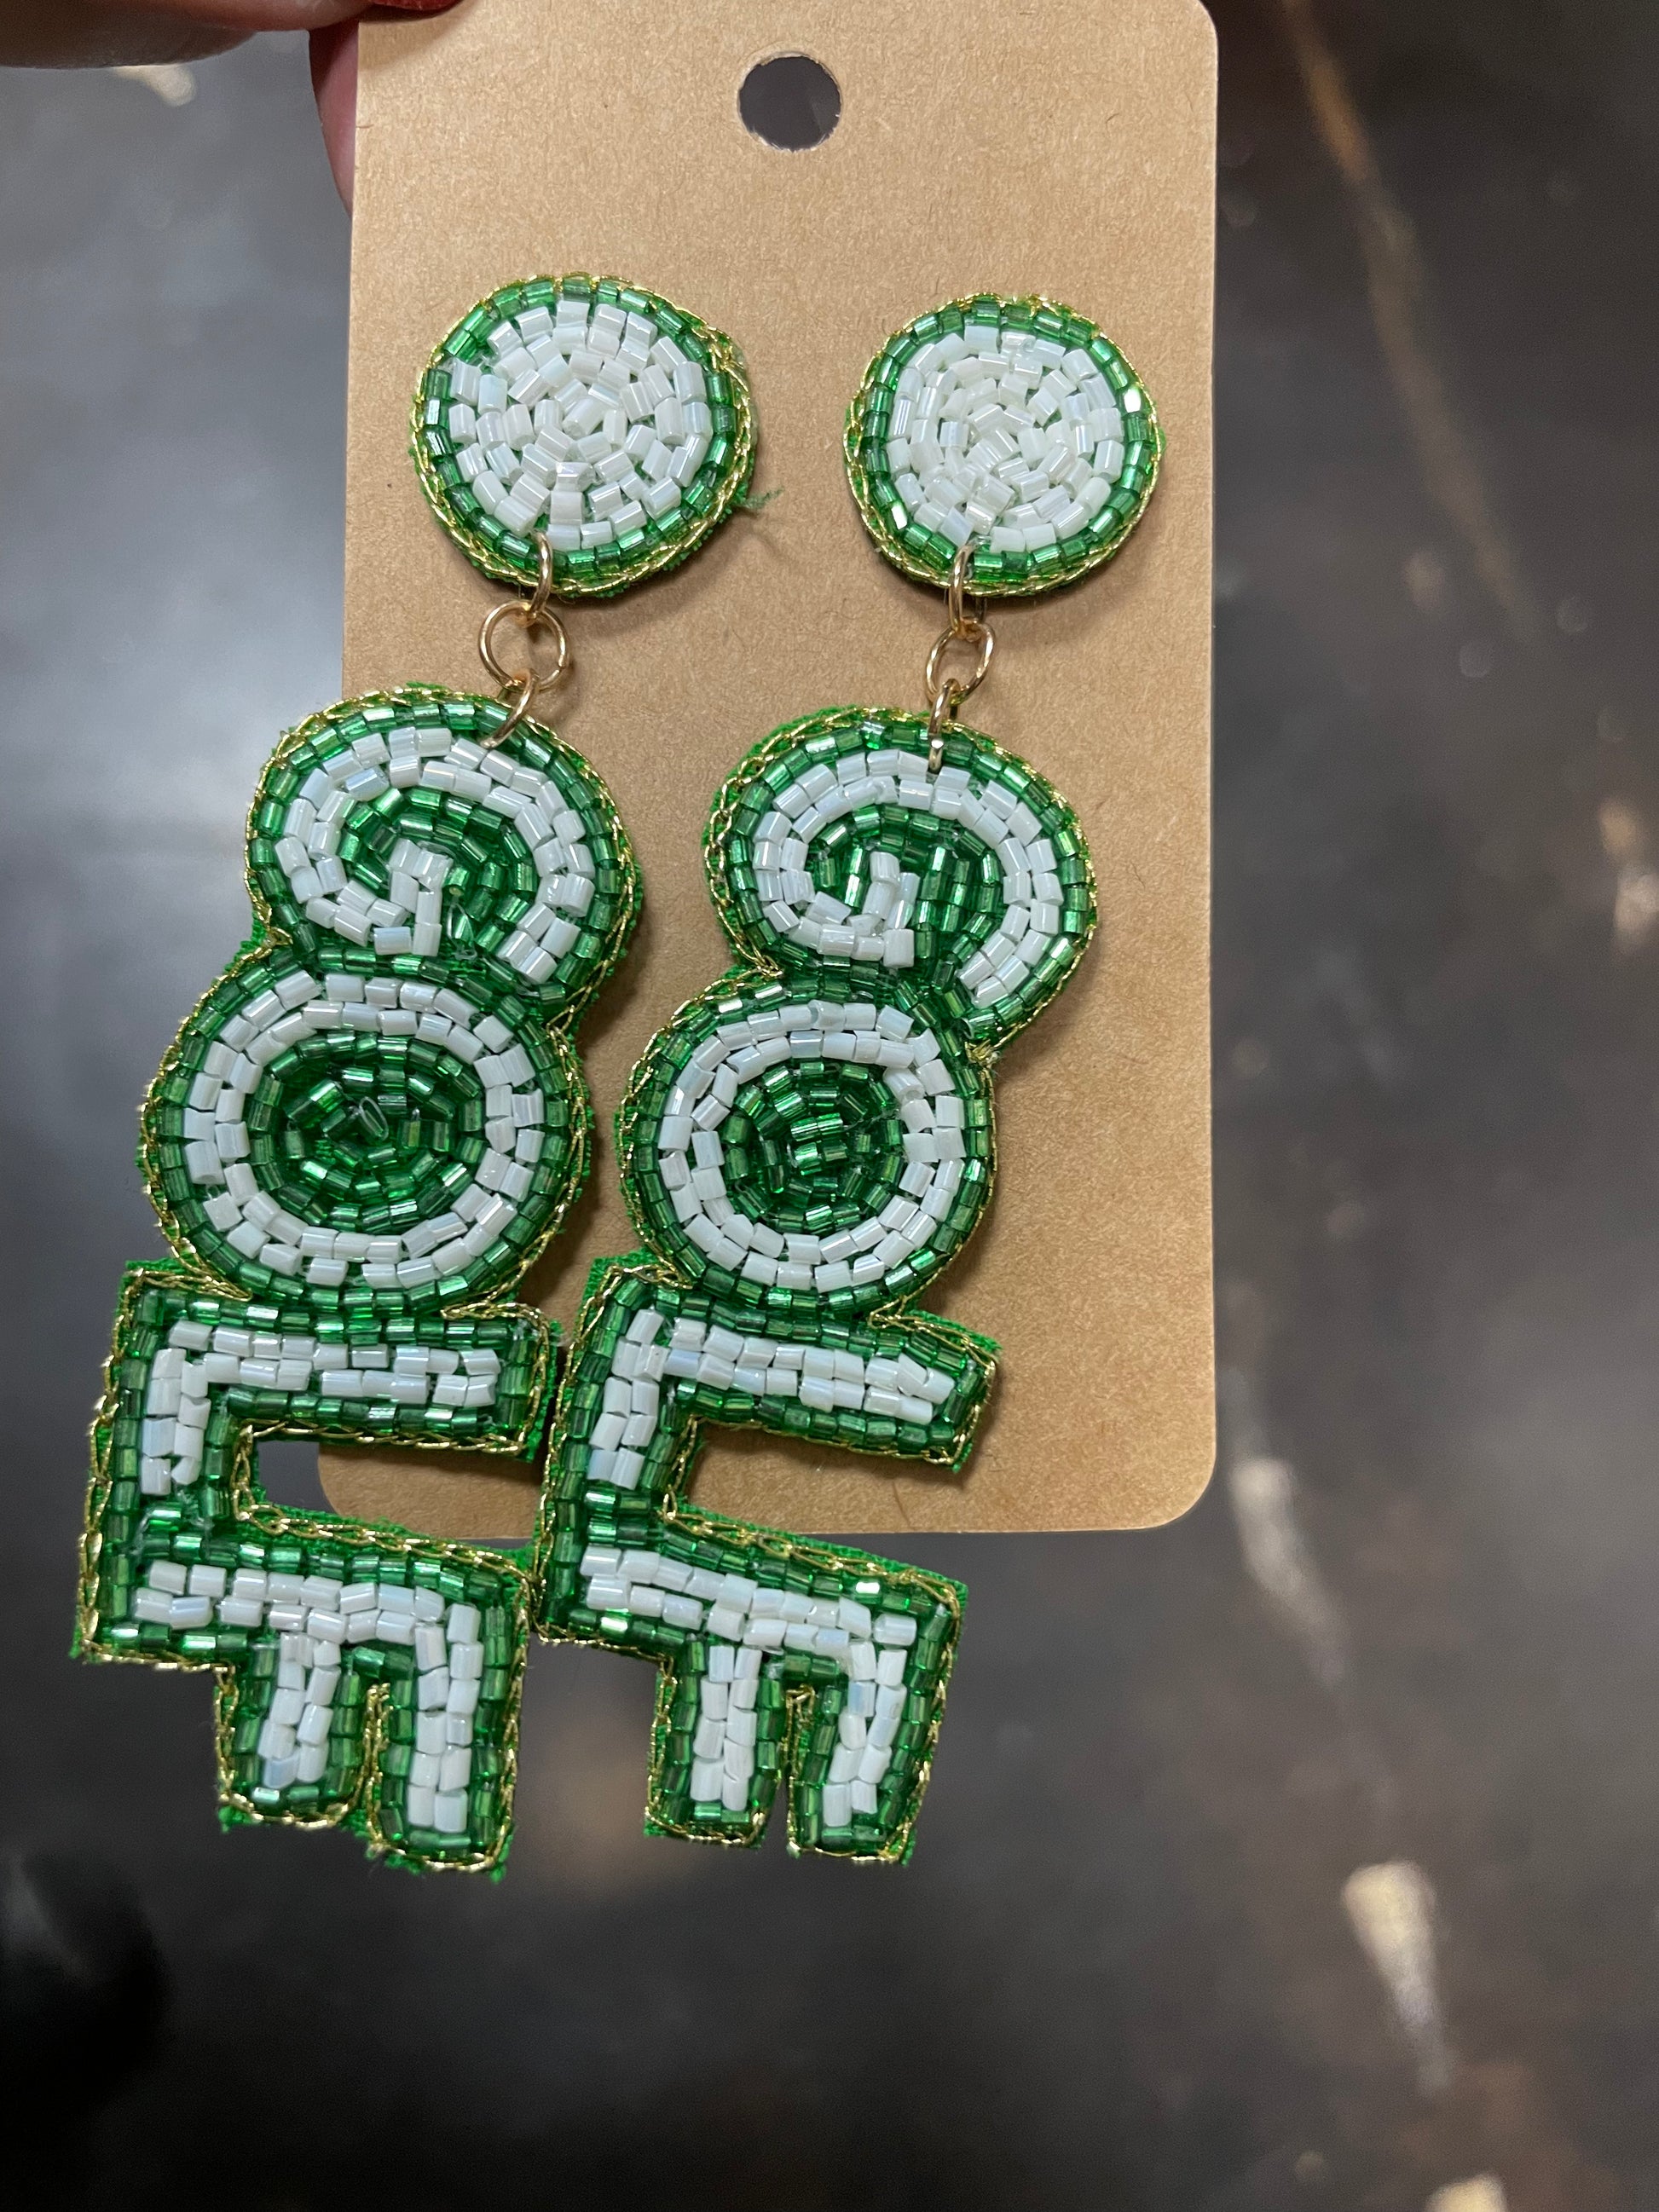 Dangle beaded earrings featuring "GOLF" in white and green beading.